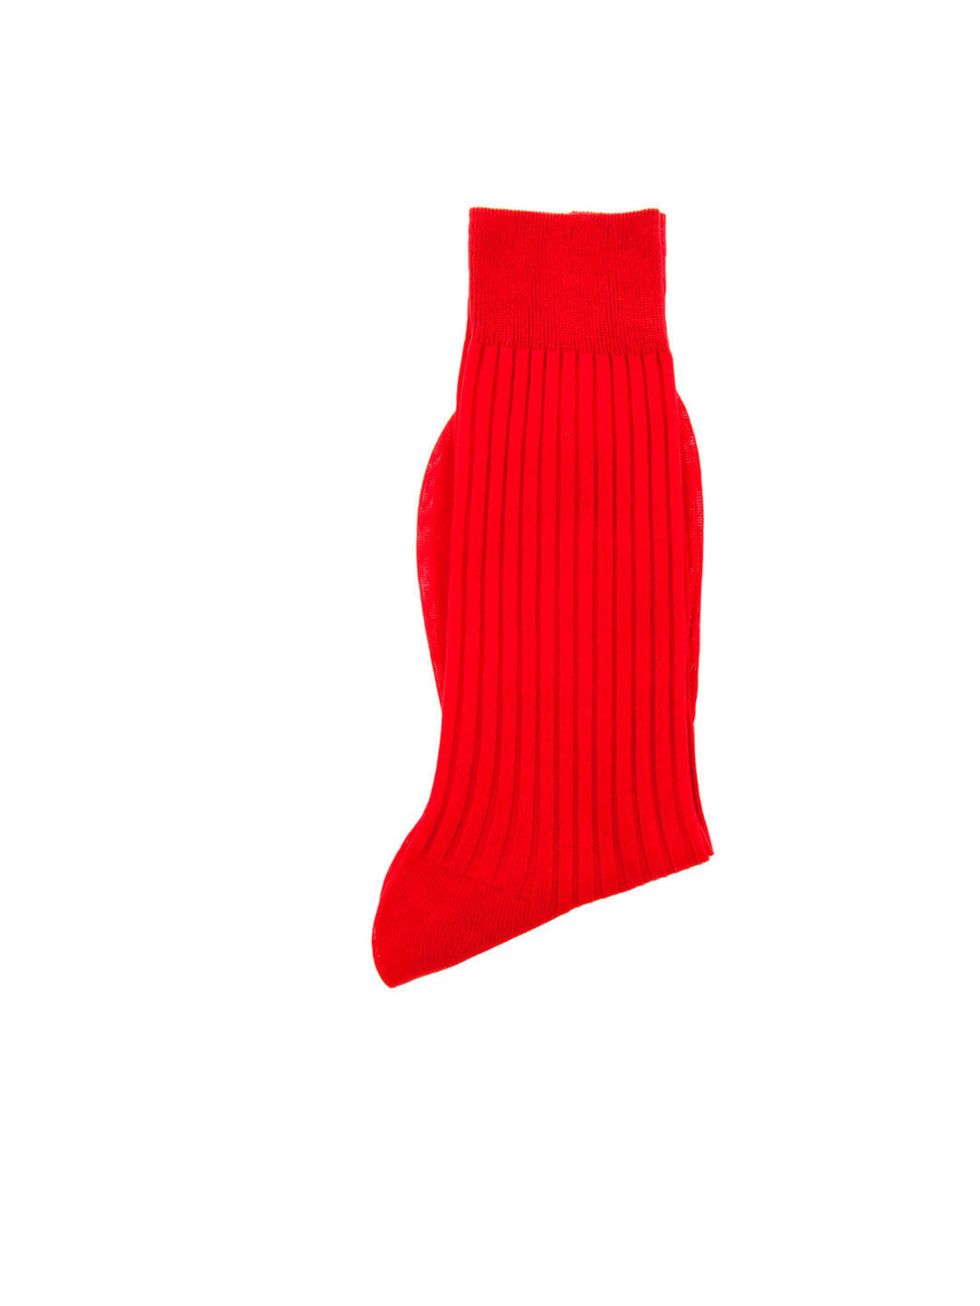 <p><strong><6 MONTHS</strong></p><p><a href="http://www.farfetch.com/shopping/men/pantherella-ribbed-socks-item-10197123.aspx">Pantherella</a> socks £11</p>